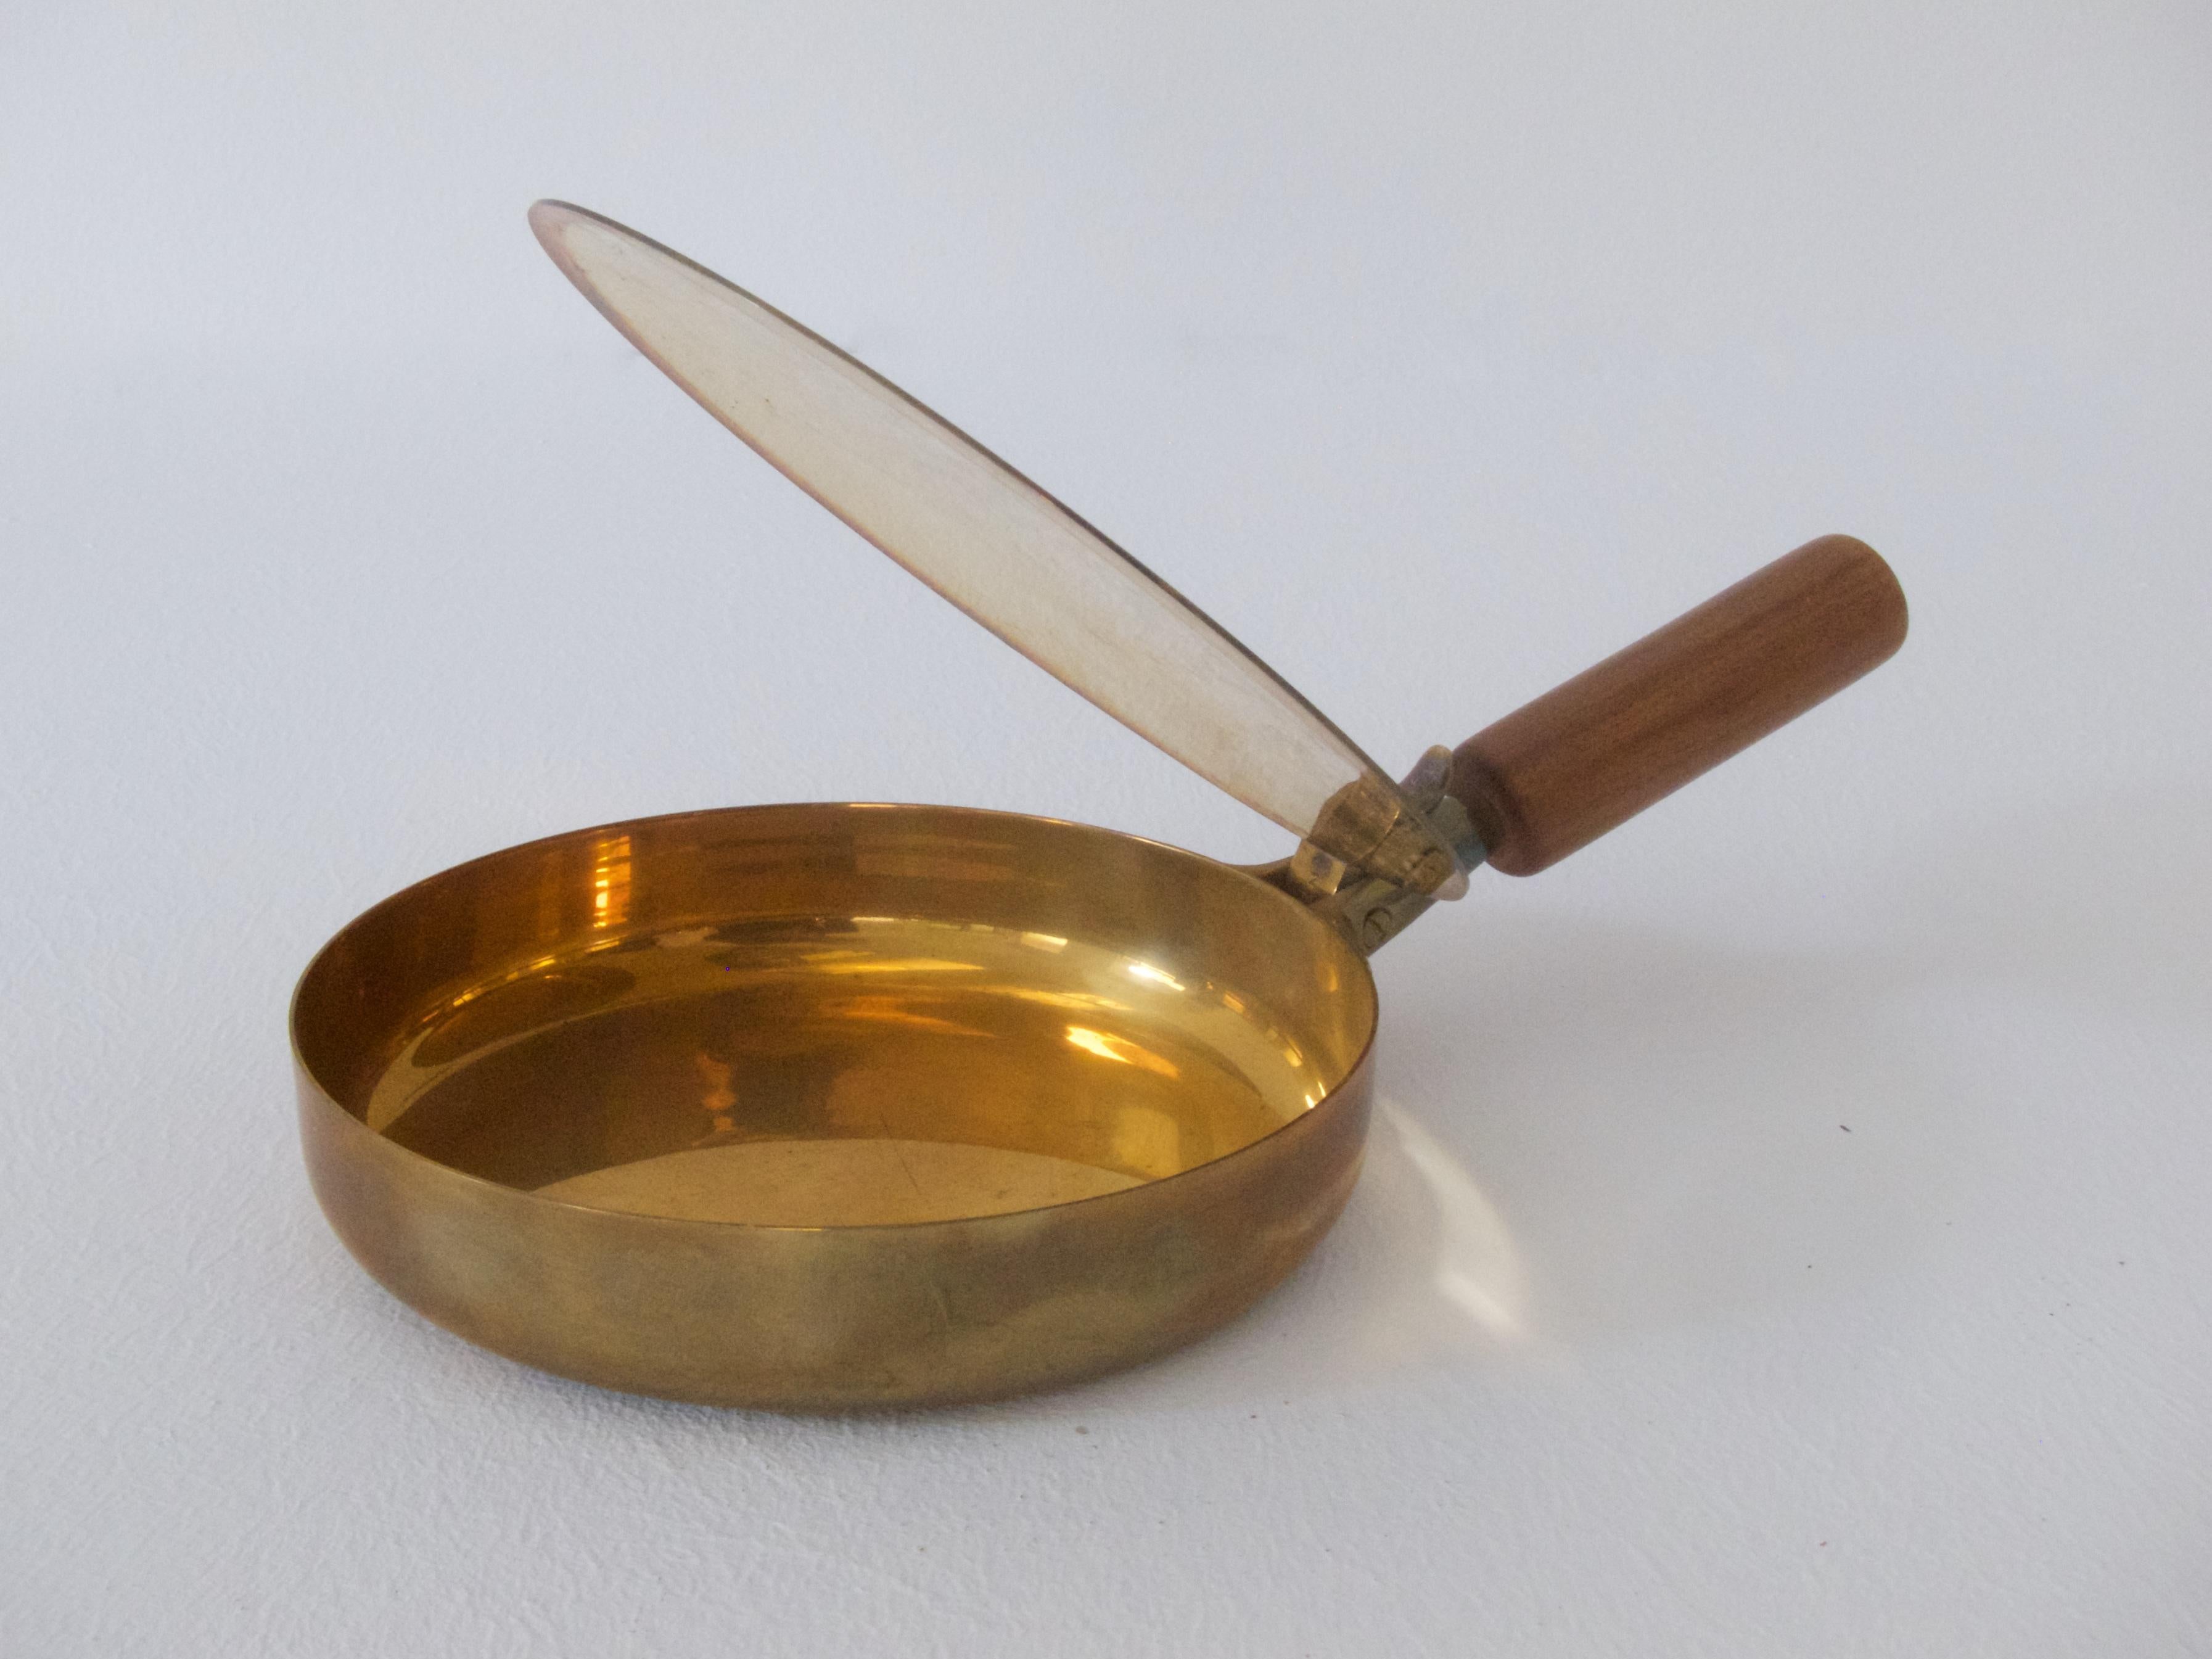 Silent Butler No 3709
1950s by Carl Auböck
polished brass, handle palisander wood

Measures: 26.5 x 15 cm, H 6.5 cm, 10.43 x 5.91 in, H 2.56 in

Good condition with traces of usage and aging.
Vintage piece!

Lit.: die kataloge der